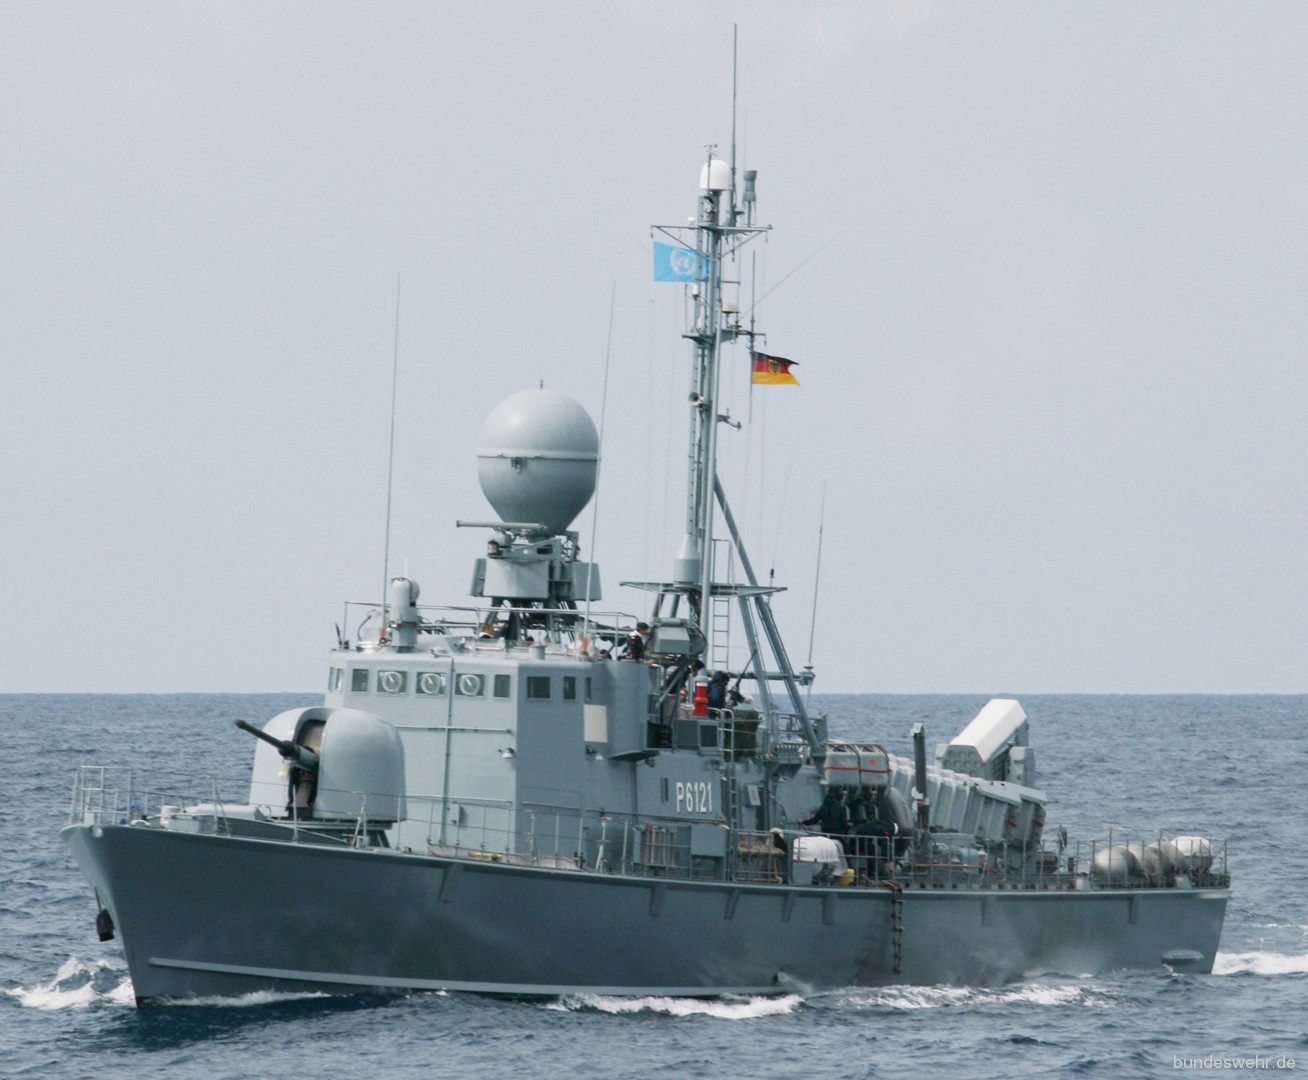 p6121 s71 fgs gepard type 143a class fast attack missile craft german navy 03